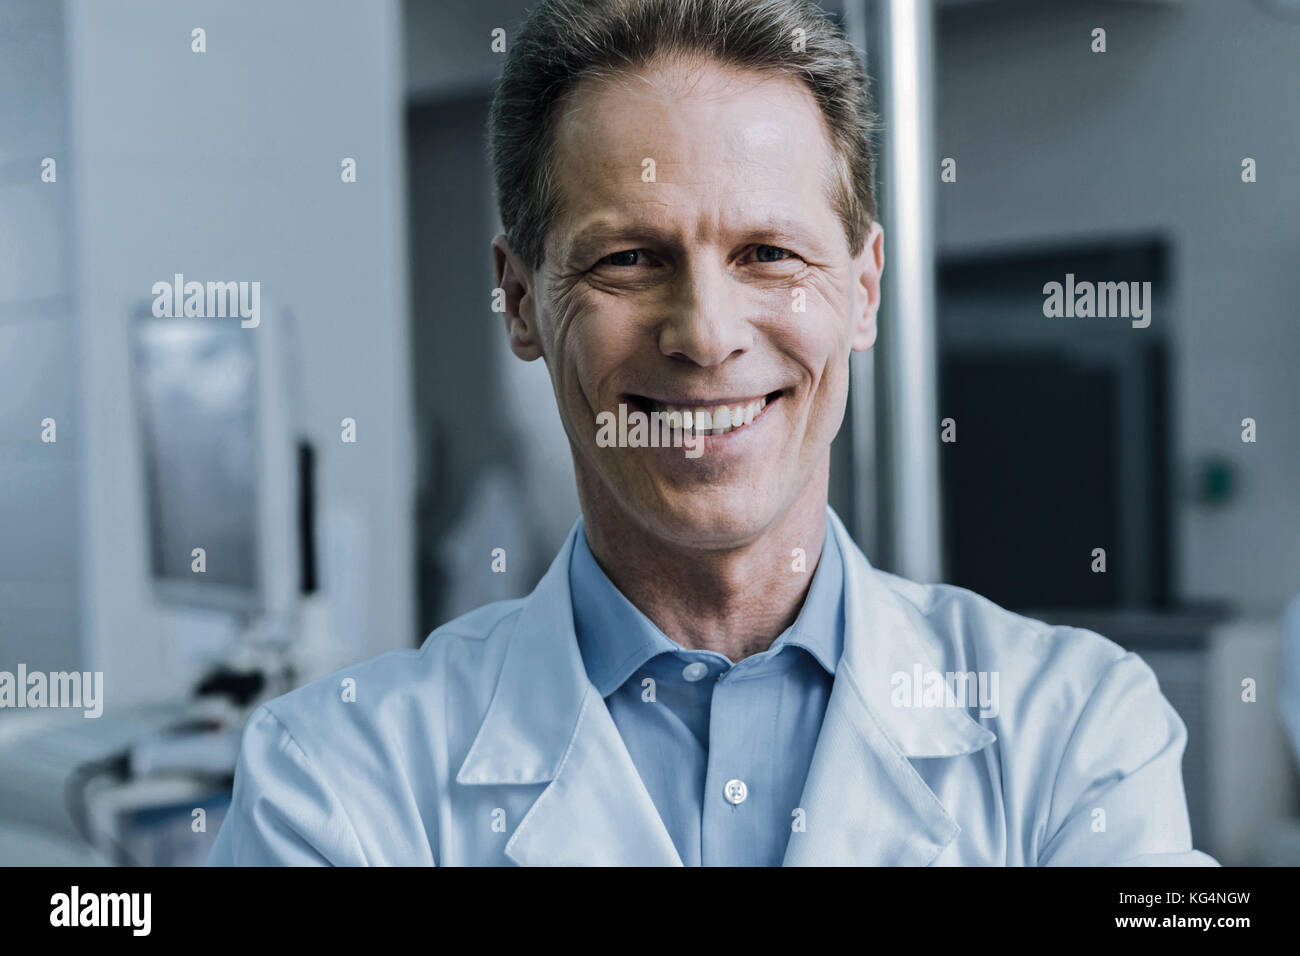 Portrait of a happy professional scientist smiling Stock Photo